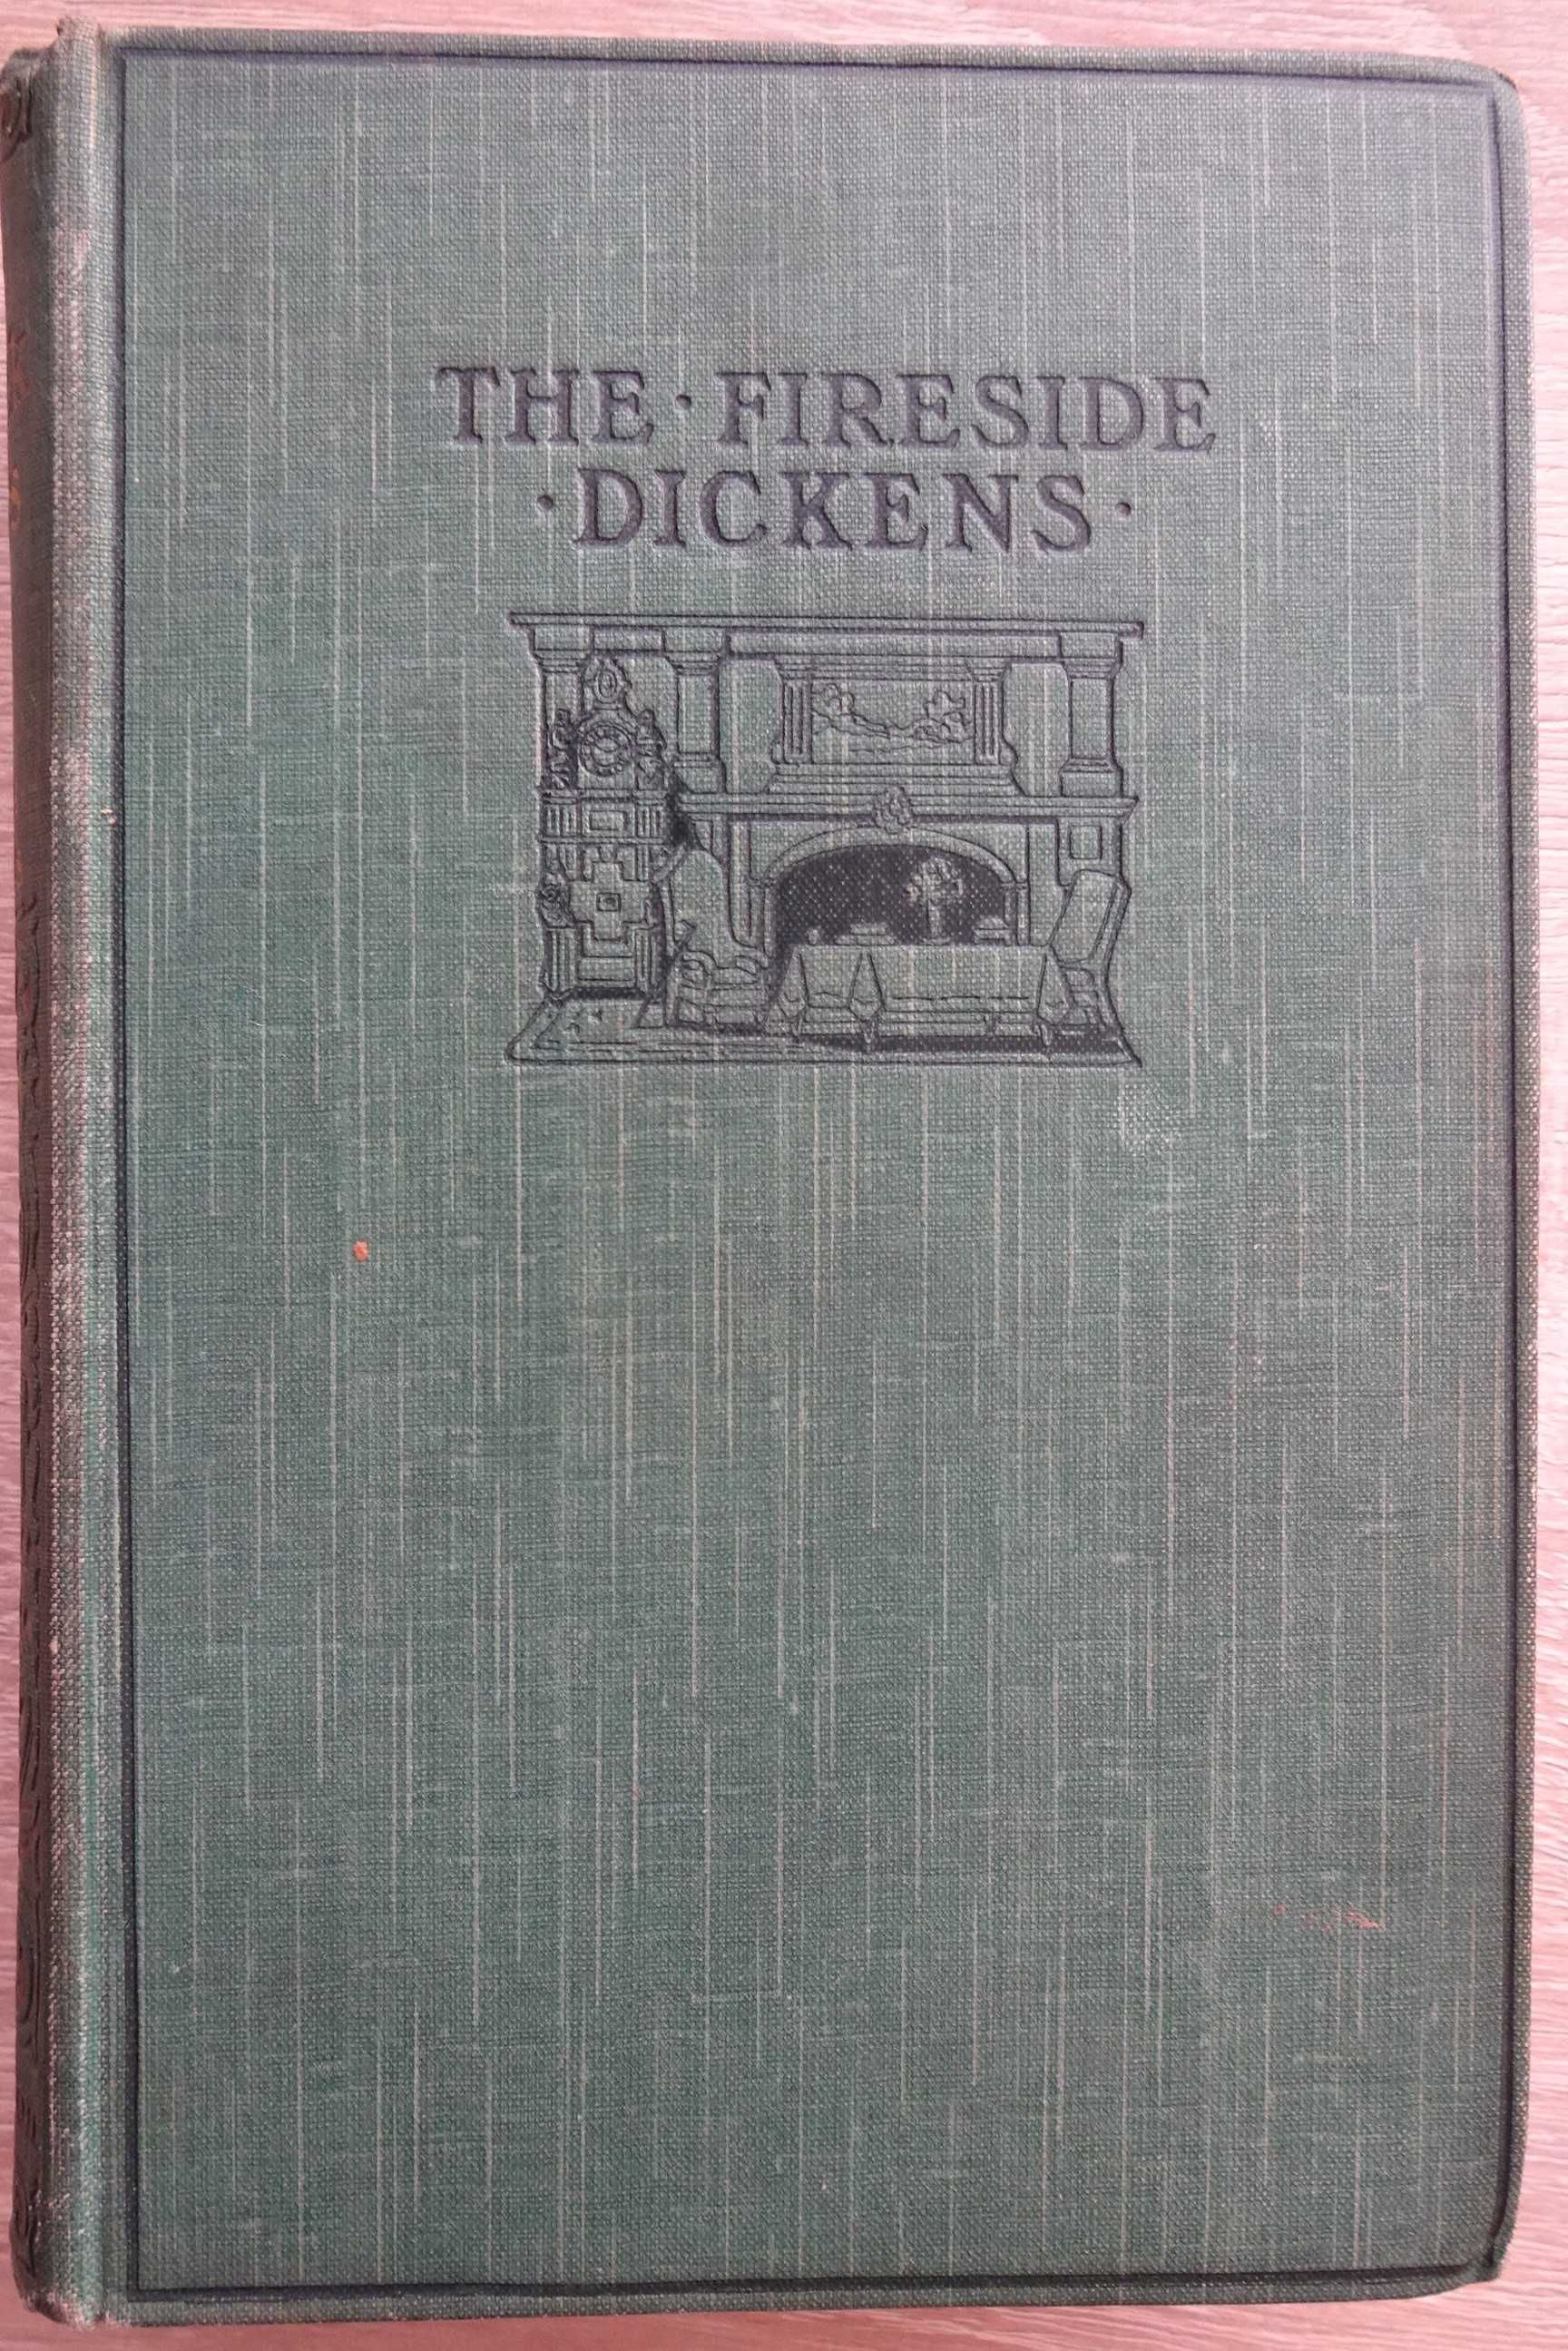 The Pickwick Papers - Charles Dickens - Fireside Edition